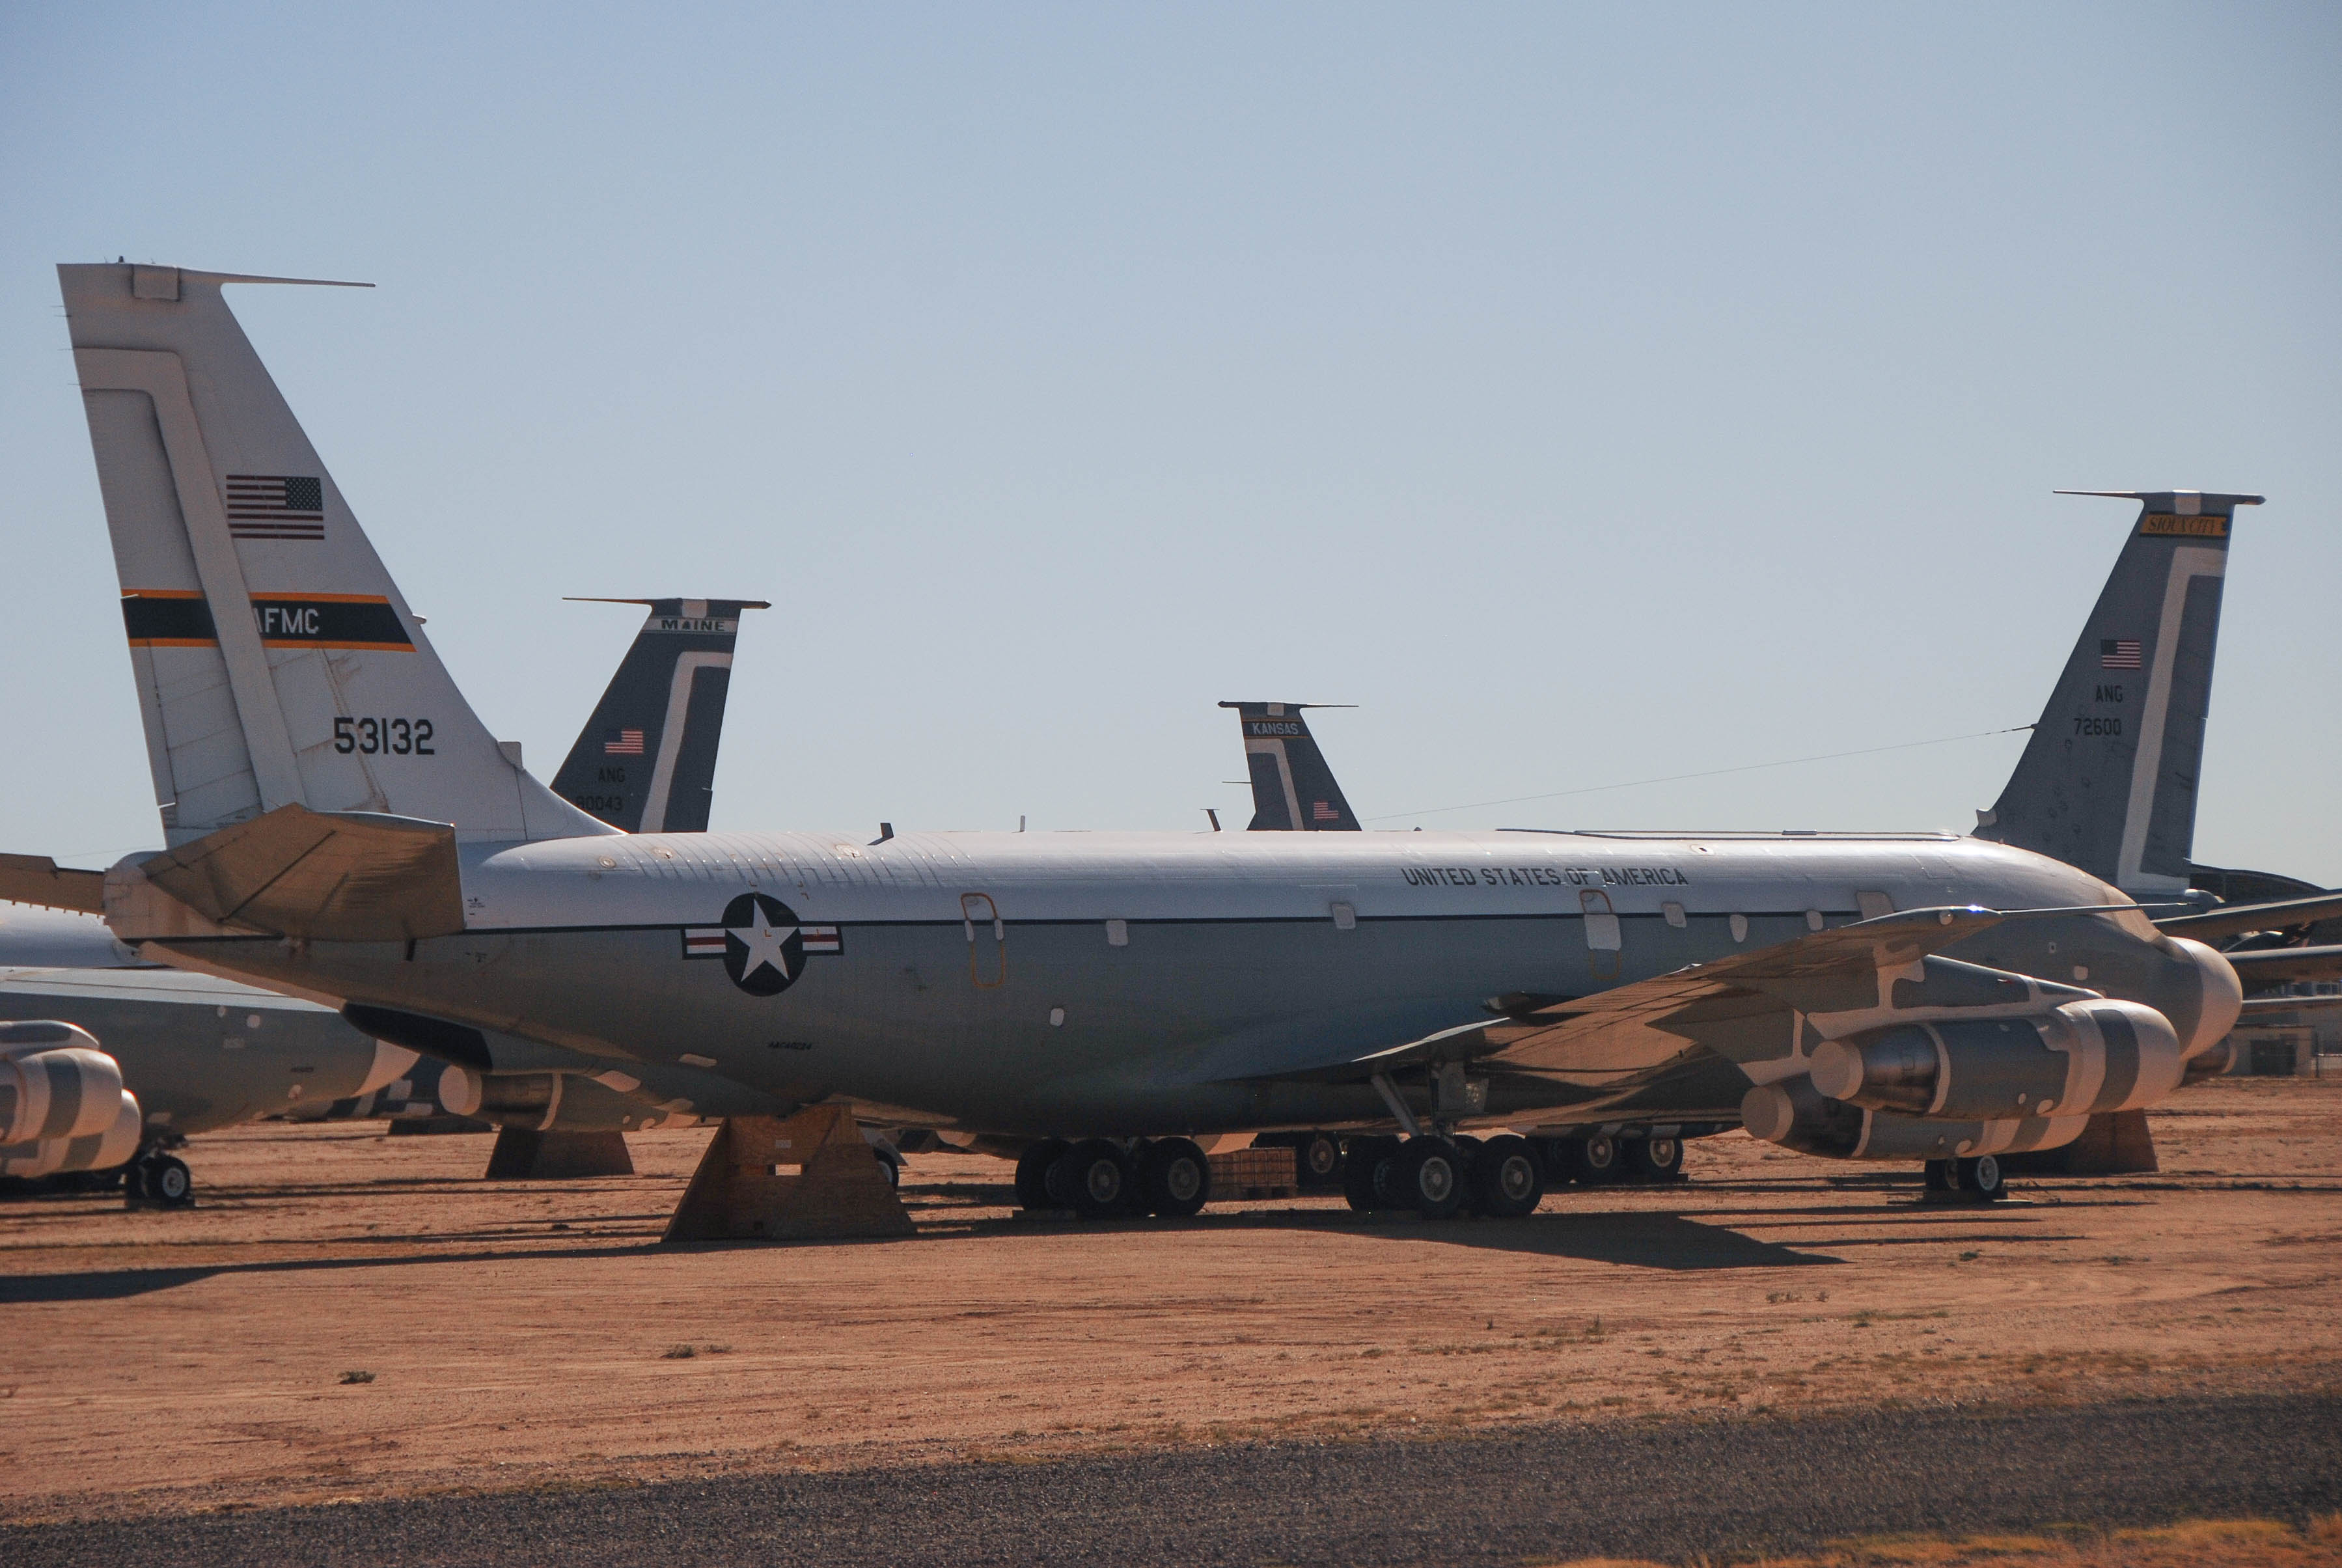 55-3132/553132 Withdrawn from use Boeing C-135 Stratotanker Airframe Information - AVSpotters.com